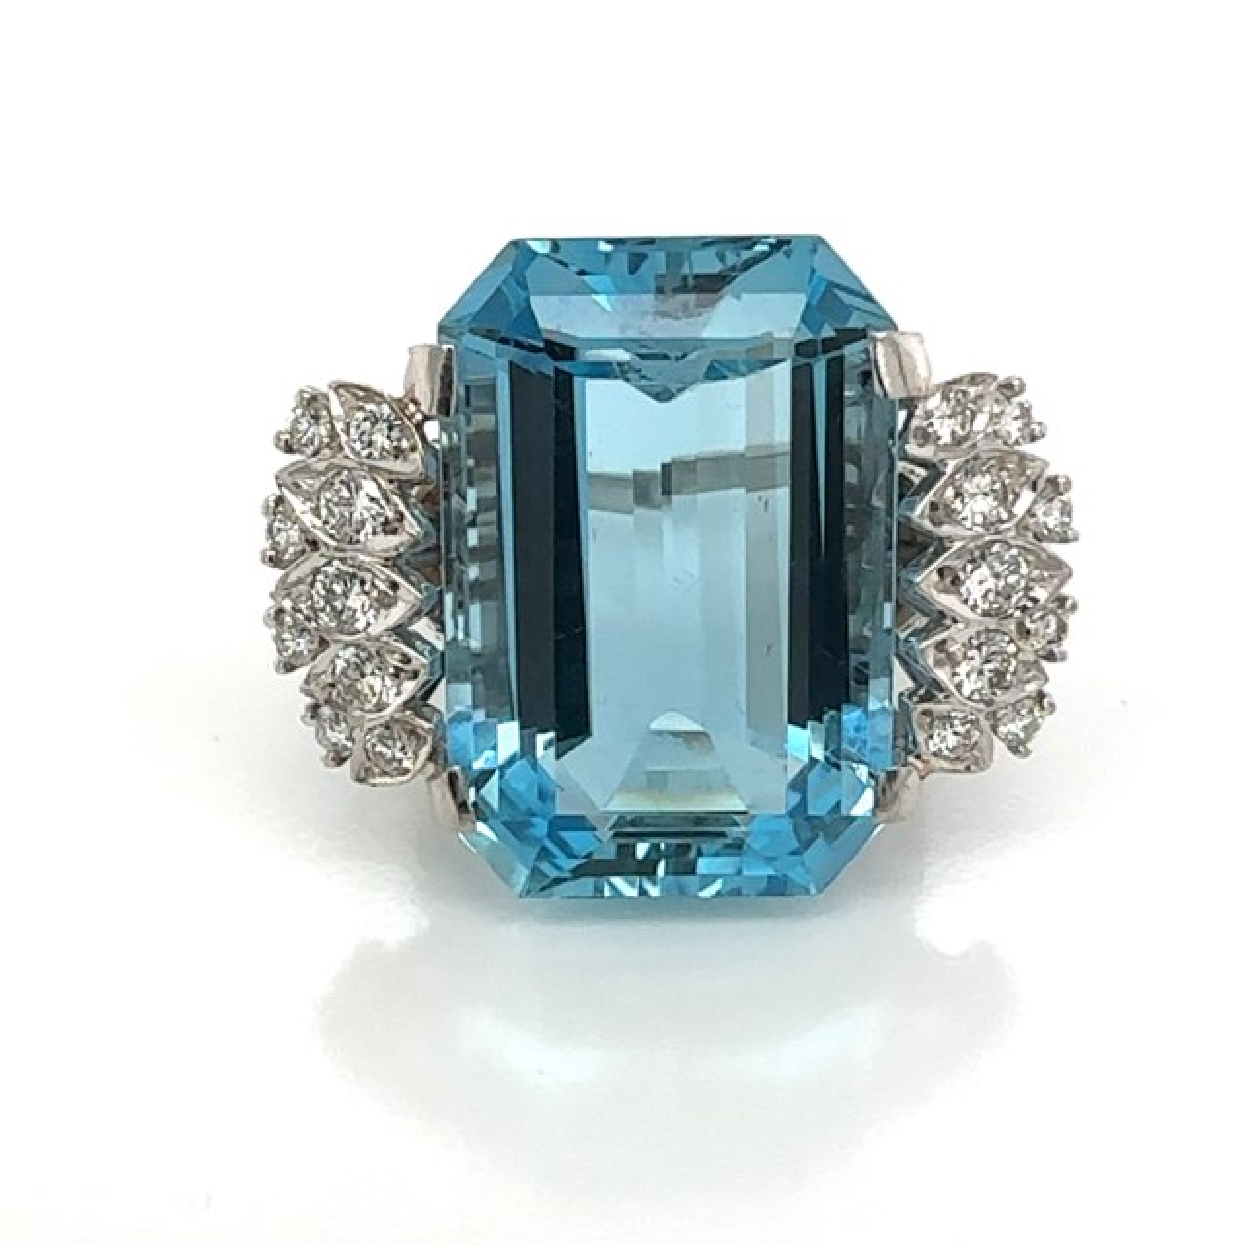 Platinum 25CT Emerald Cut Aquamarine with Round and Baggette Diamond Accents Size 9.75